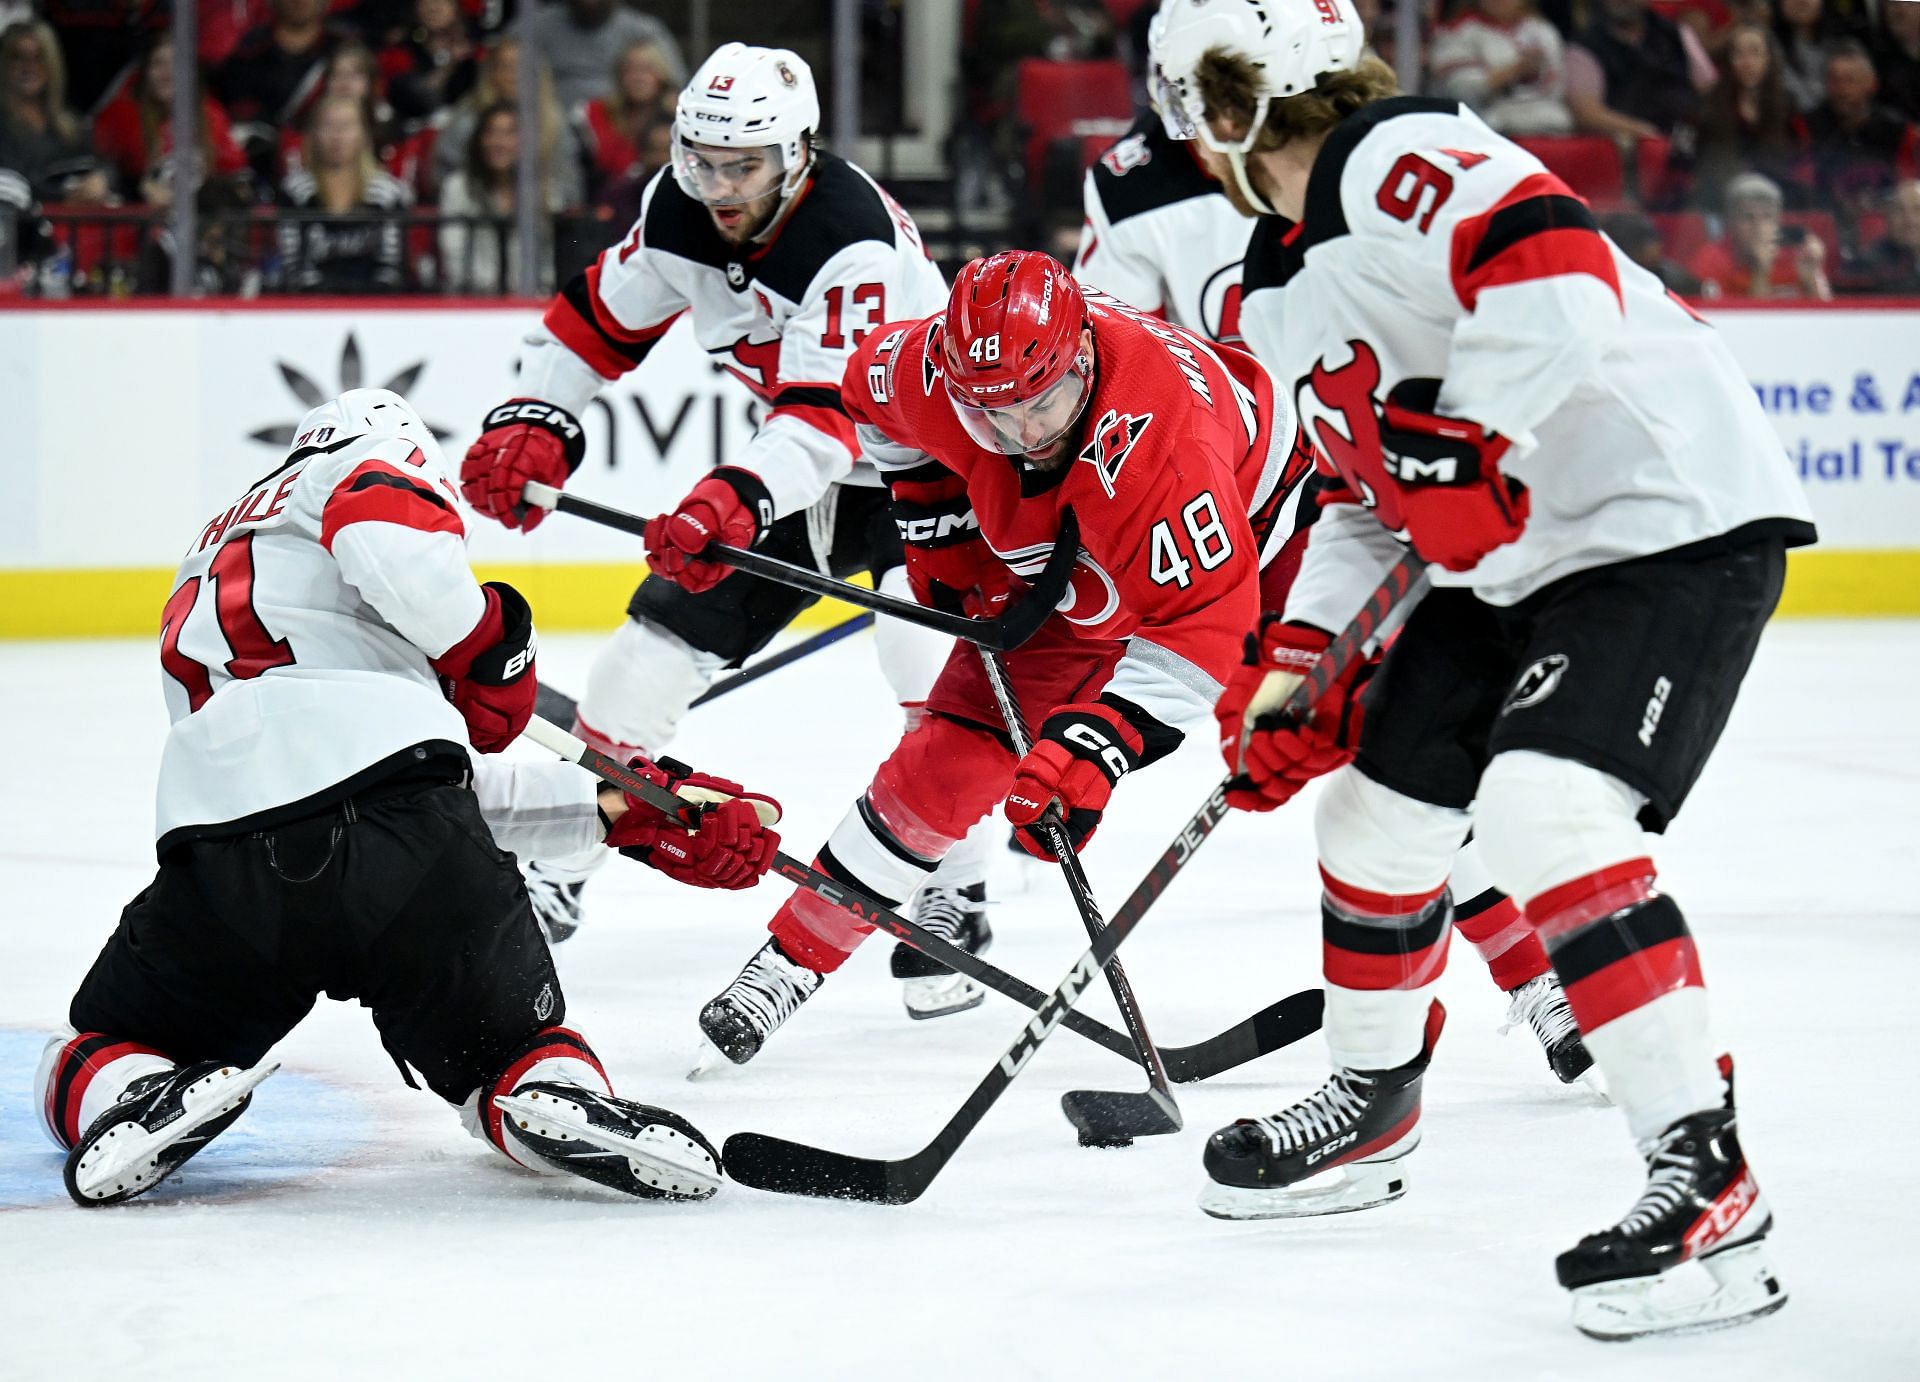 Carolina Hurricanes @ New Jersey Devils: Lineups and Game